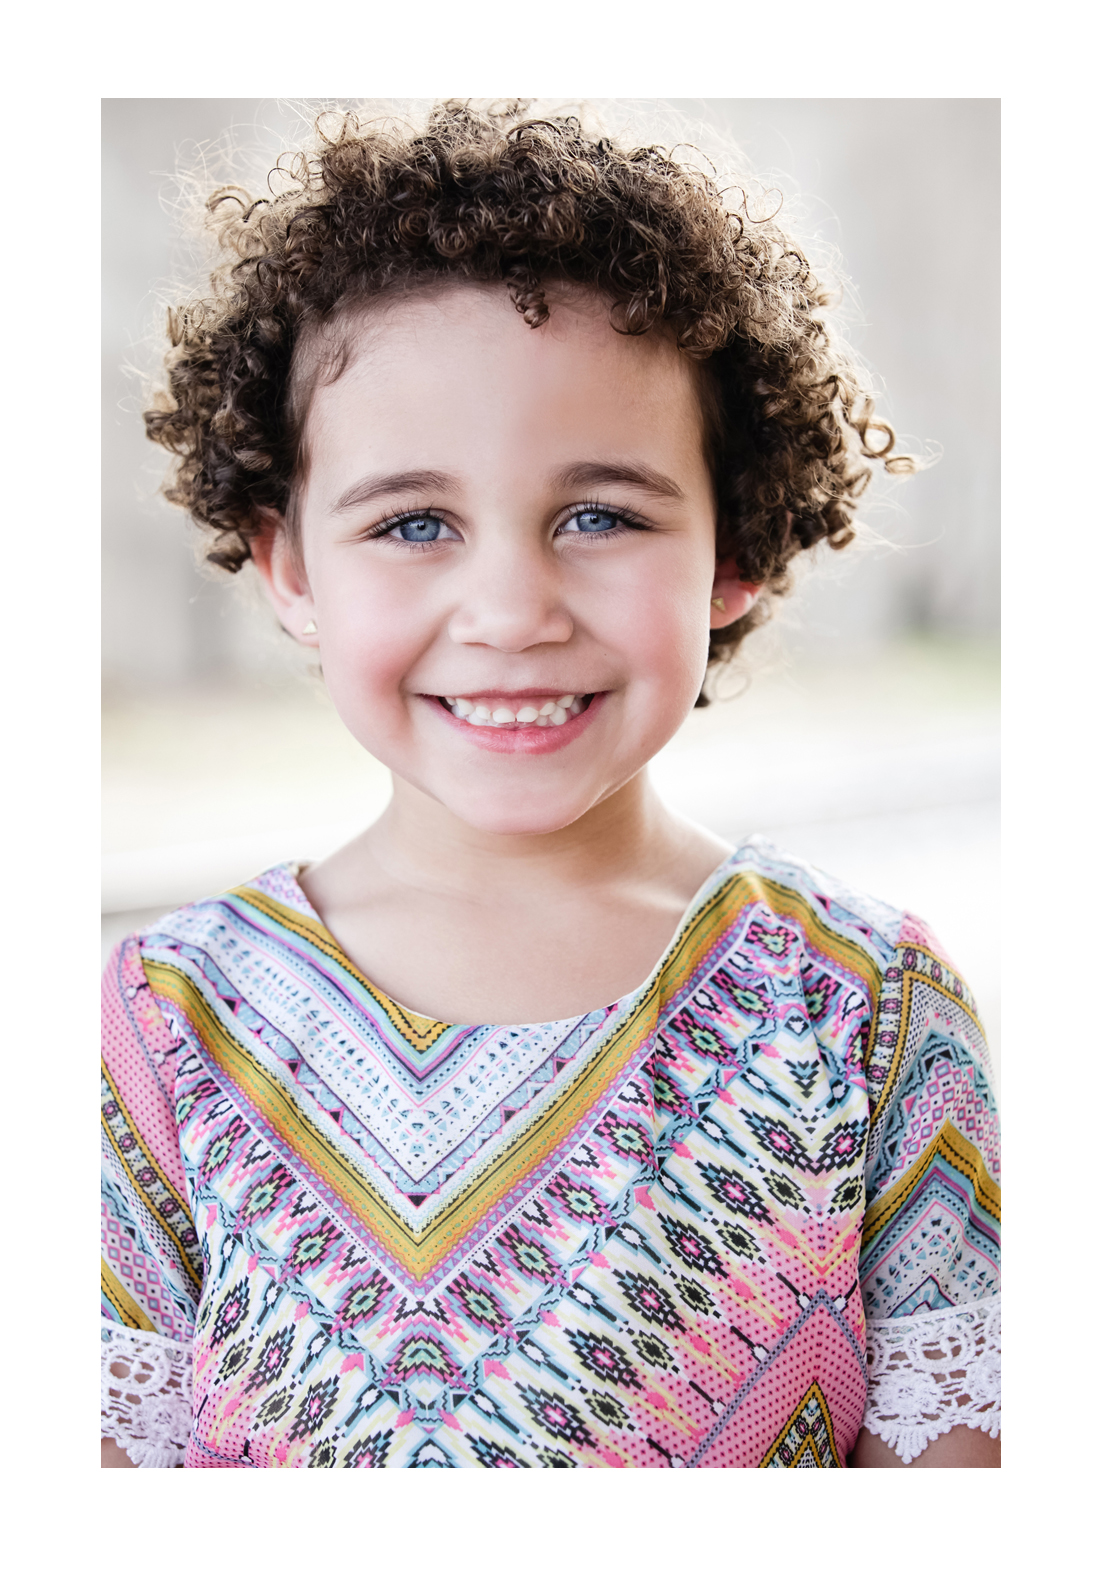 A young girl with curly brown hair faces the camera with a bright smile. She wears a colorful patterned shirt and two diamond earrings